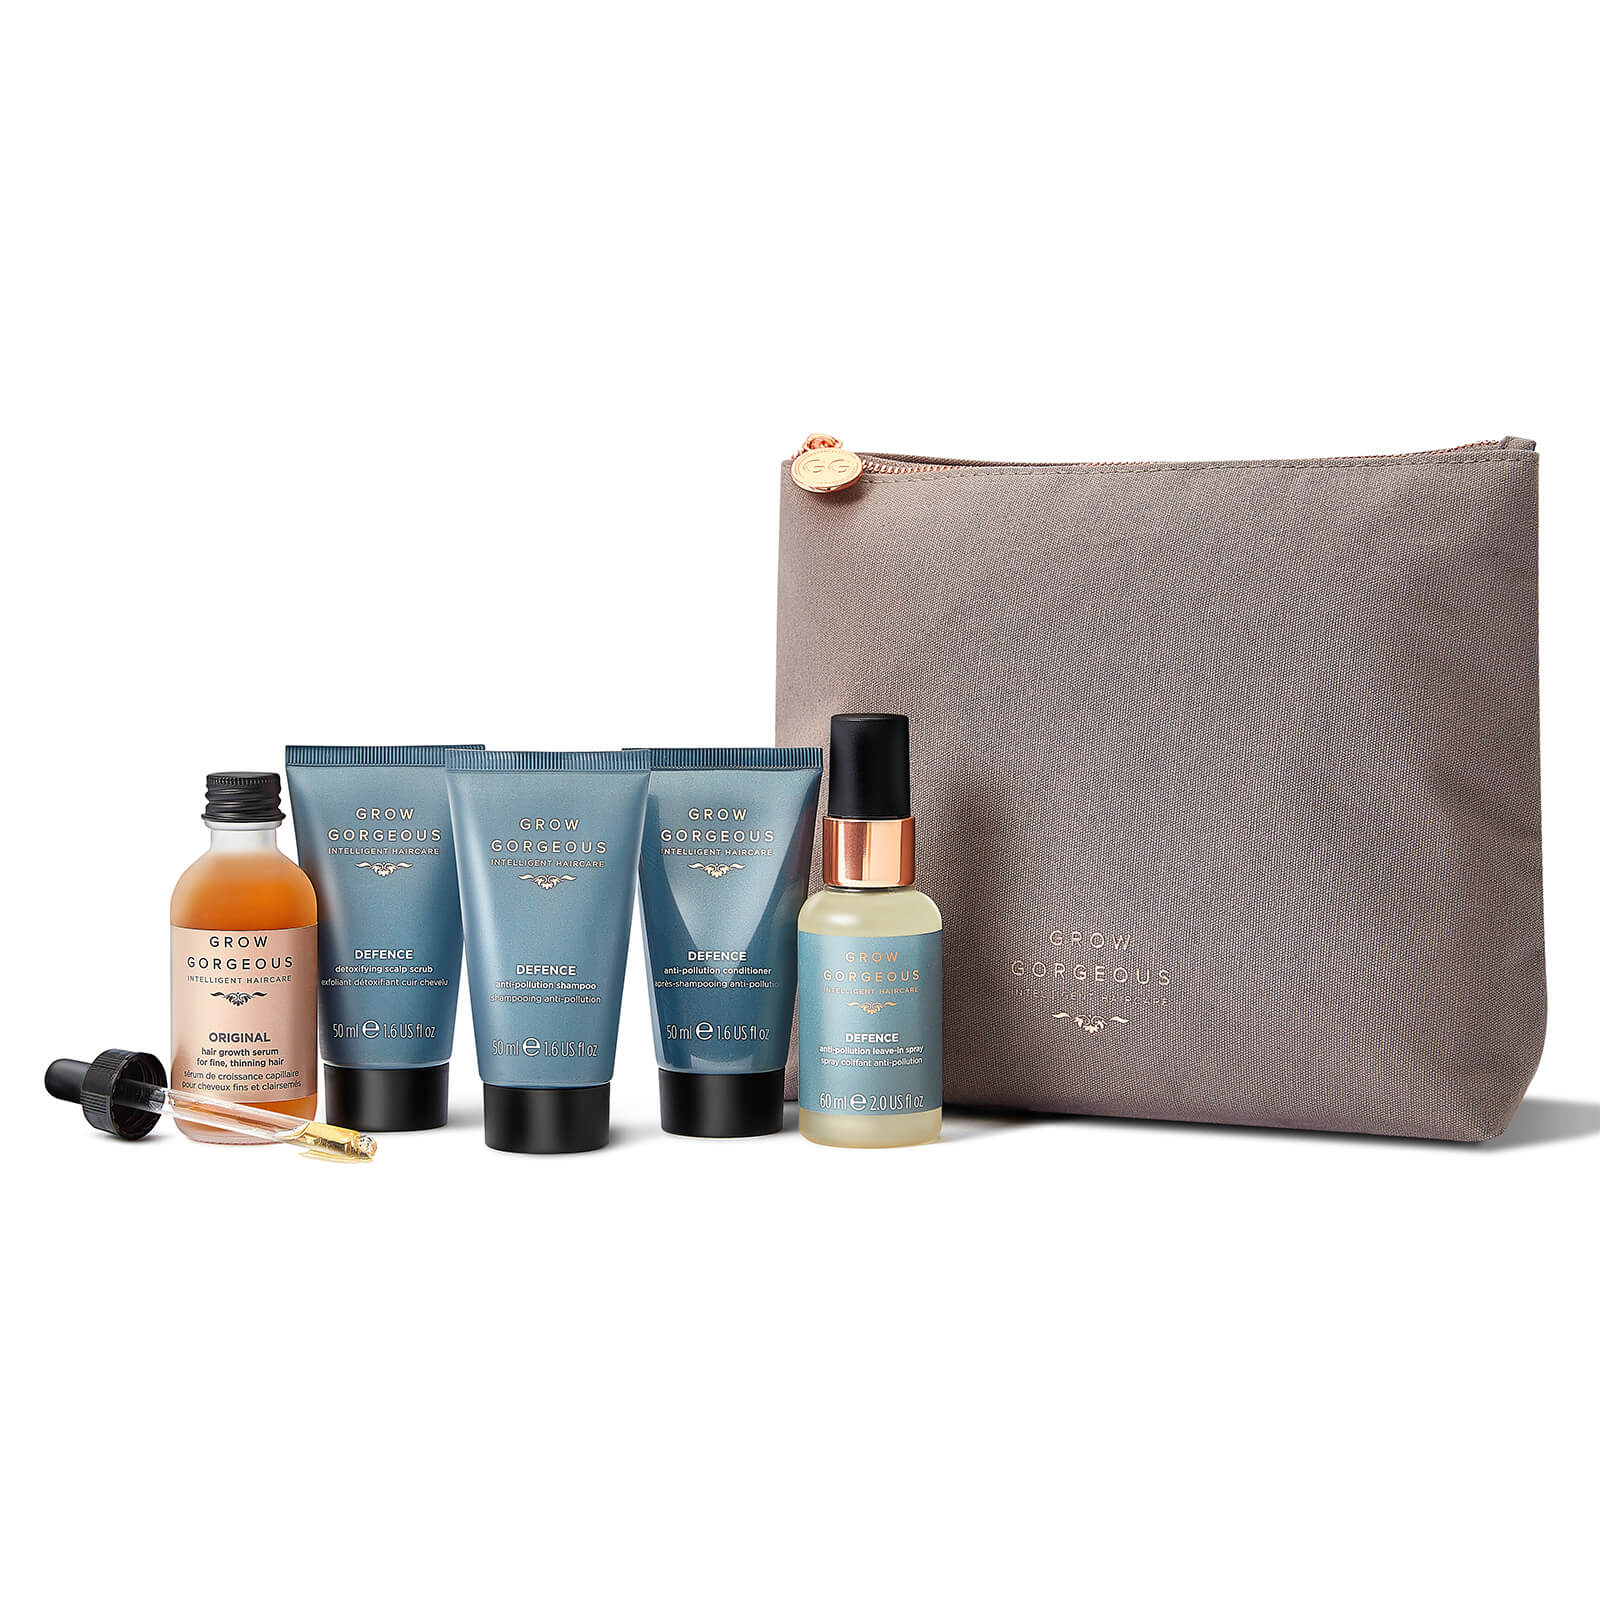 Grow Gorgeous Defence Growth Discovery Kit (Worth £51.00)